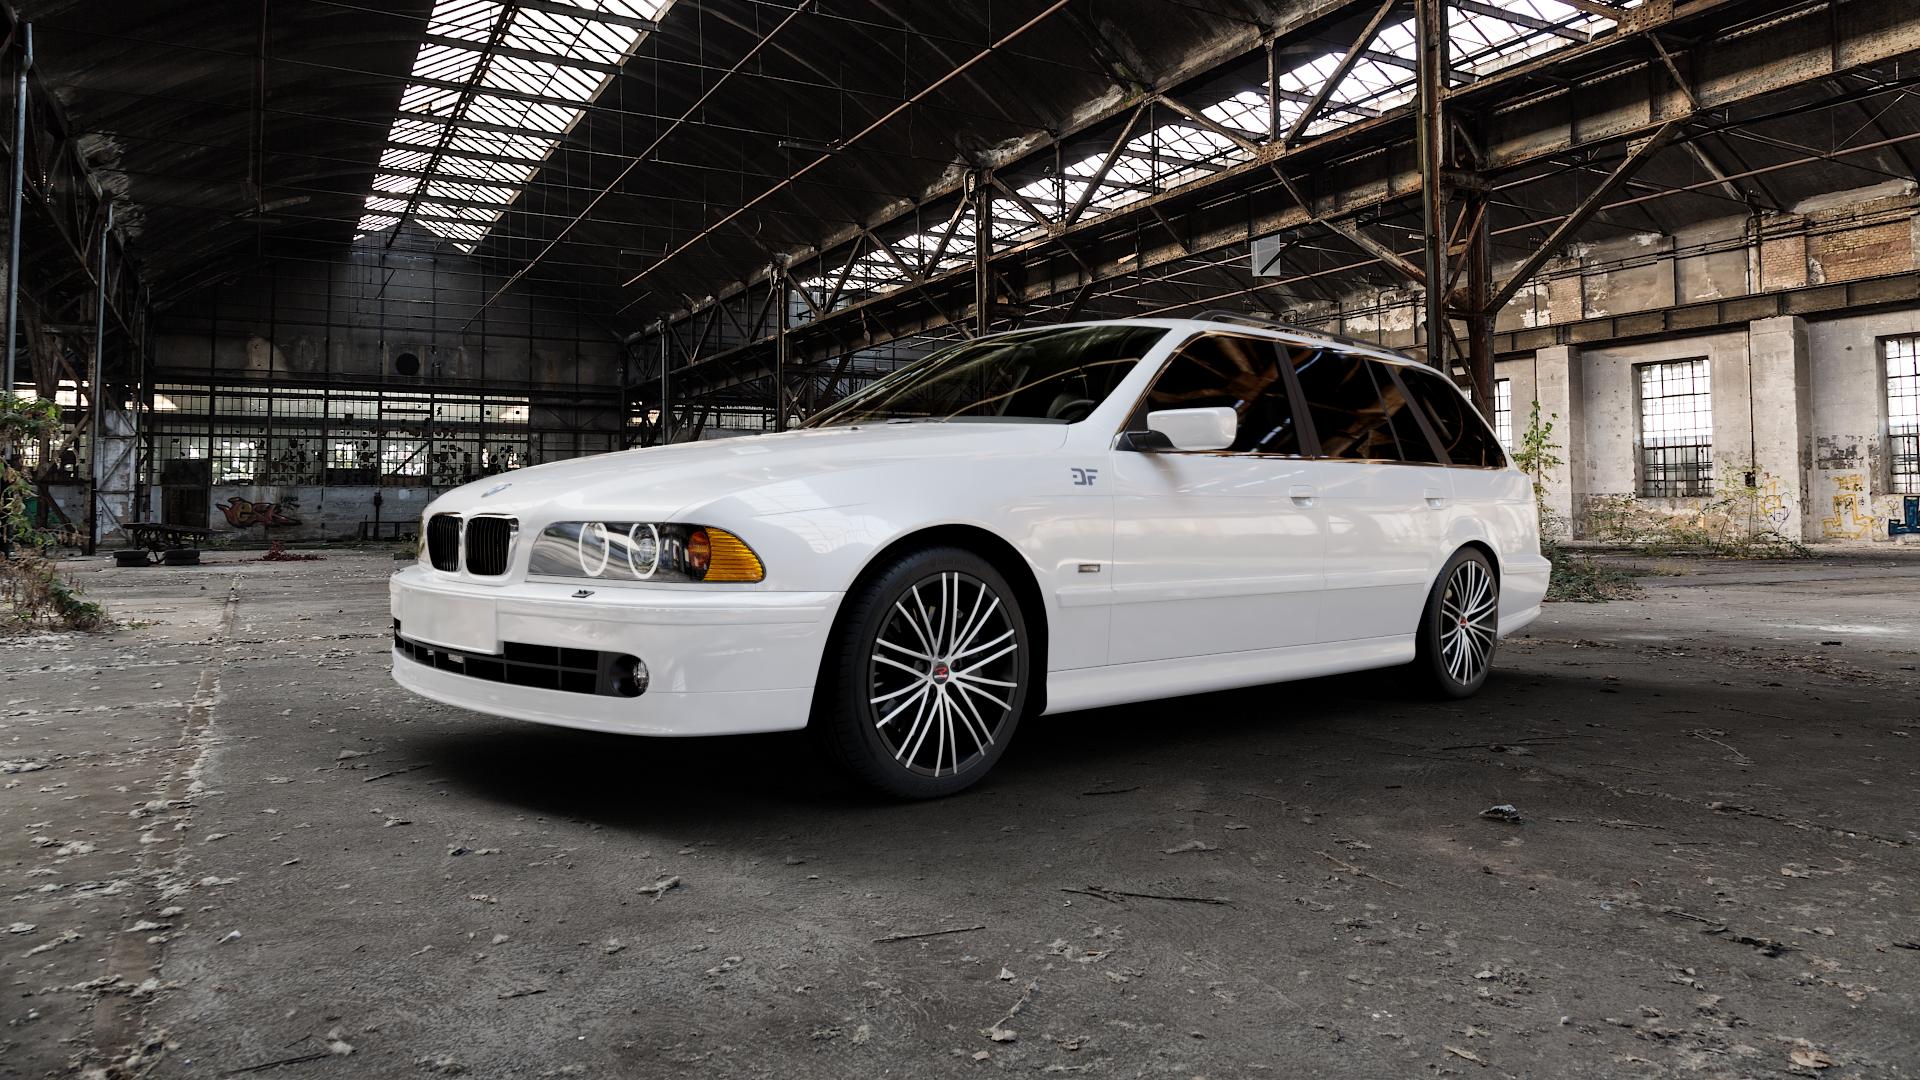 BMW 520i Type E39 (Touring) 2,0l 100kW (136 hp) Wheels and Tyre Packages |  velonity.com